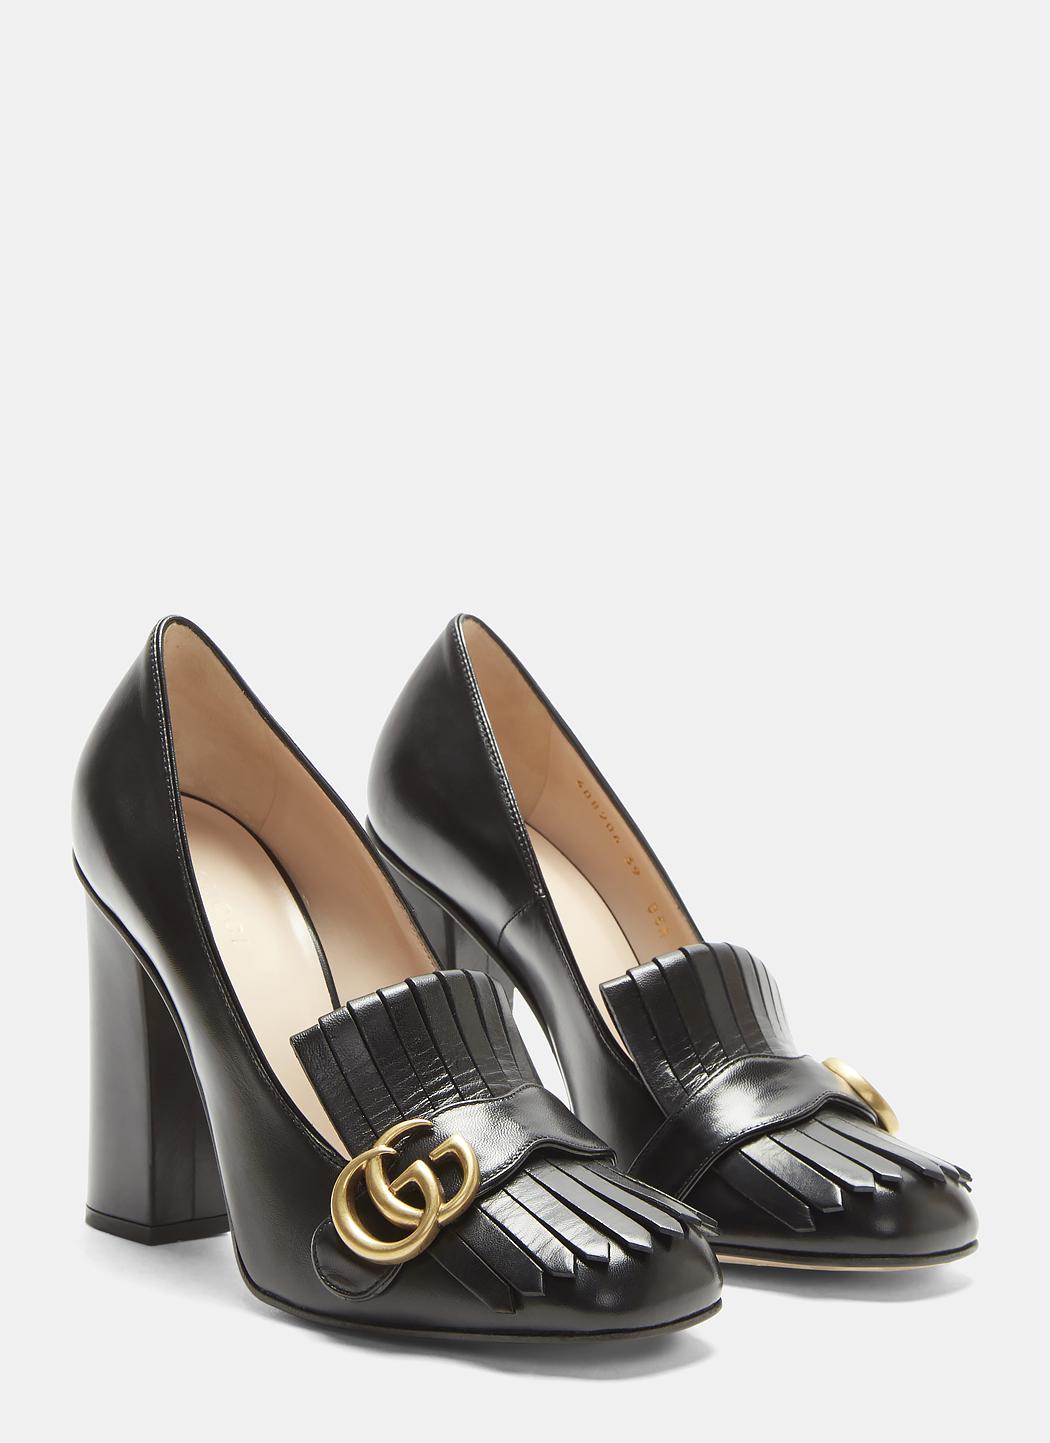 Gucci Leather Gg High-heel Fringed Marmont Pumps In Black - Lyst